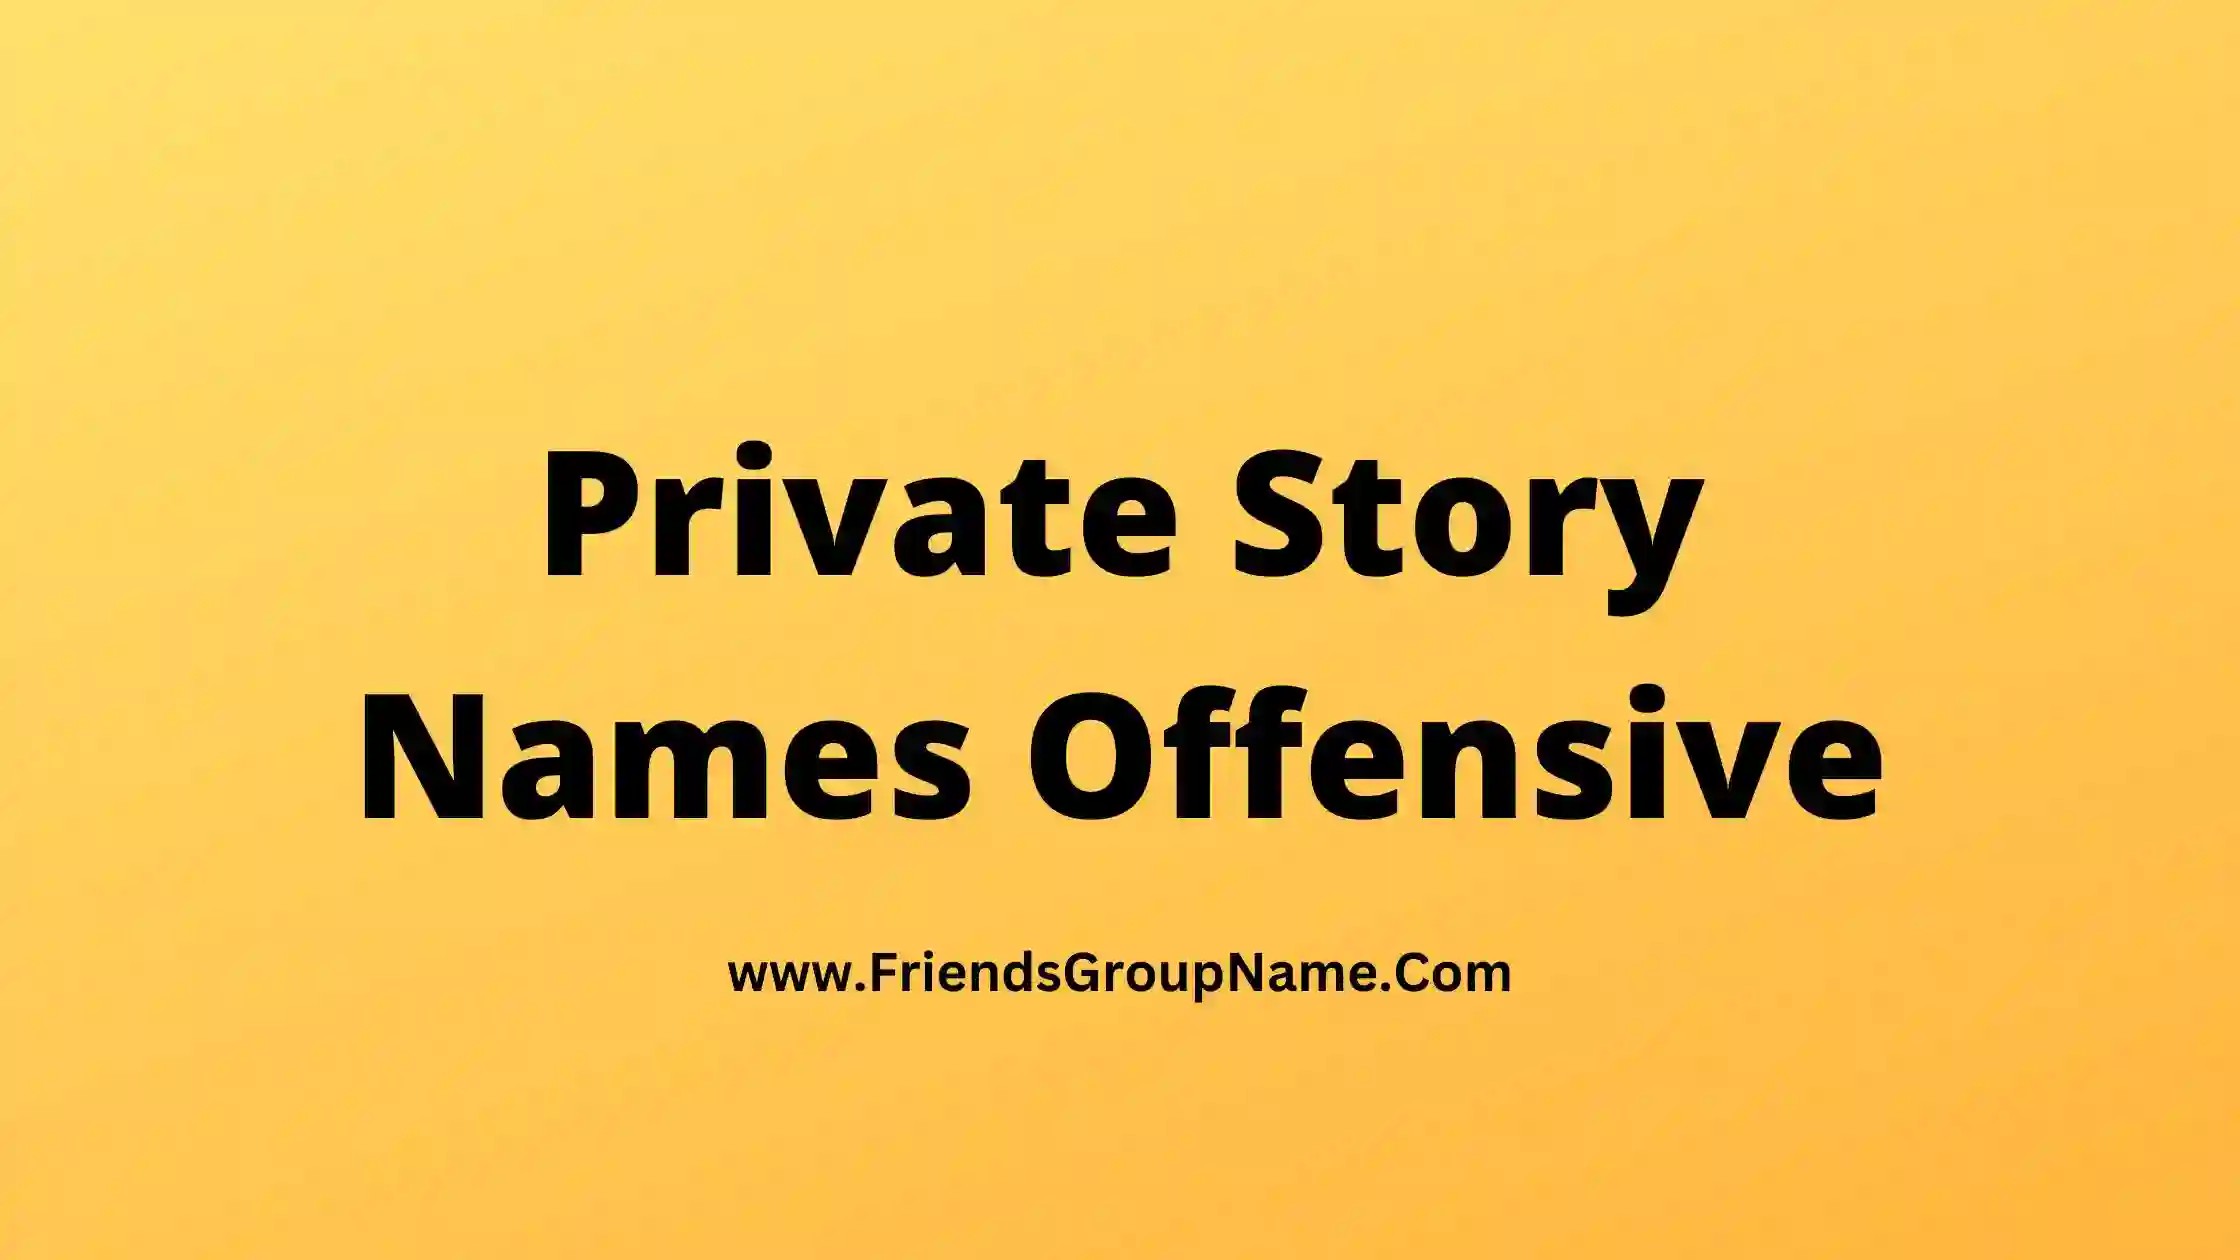 Private Story Names Offensive